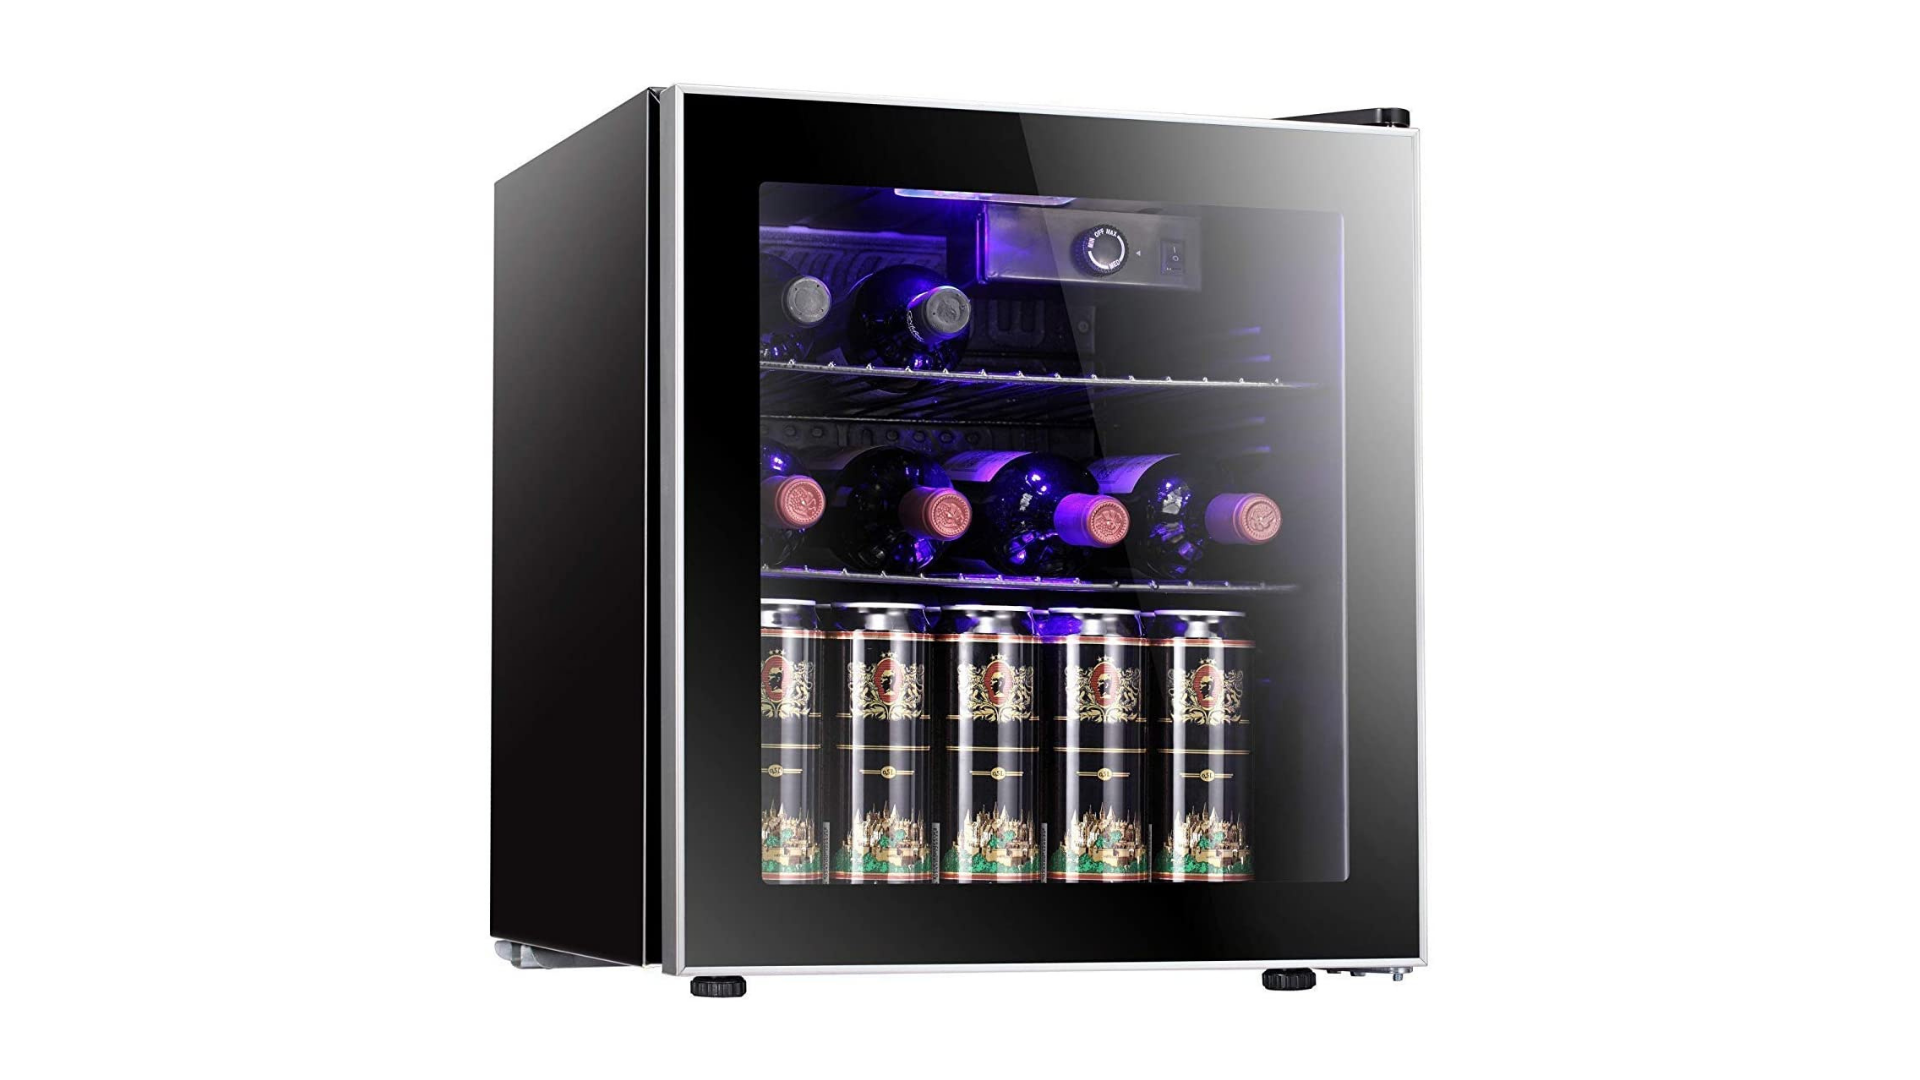 The Antarctic Star beverage fridge can keep all your favorite drinks cold and tasty in a confined space.